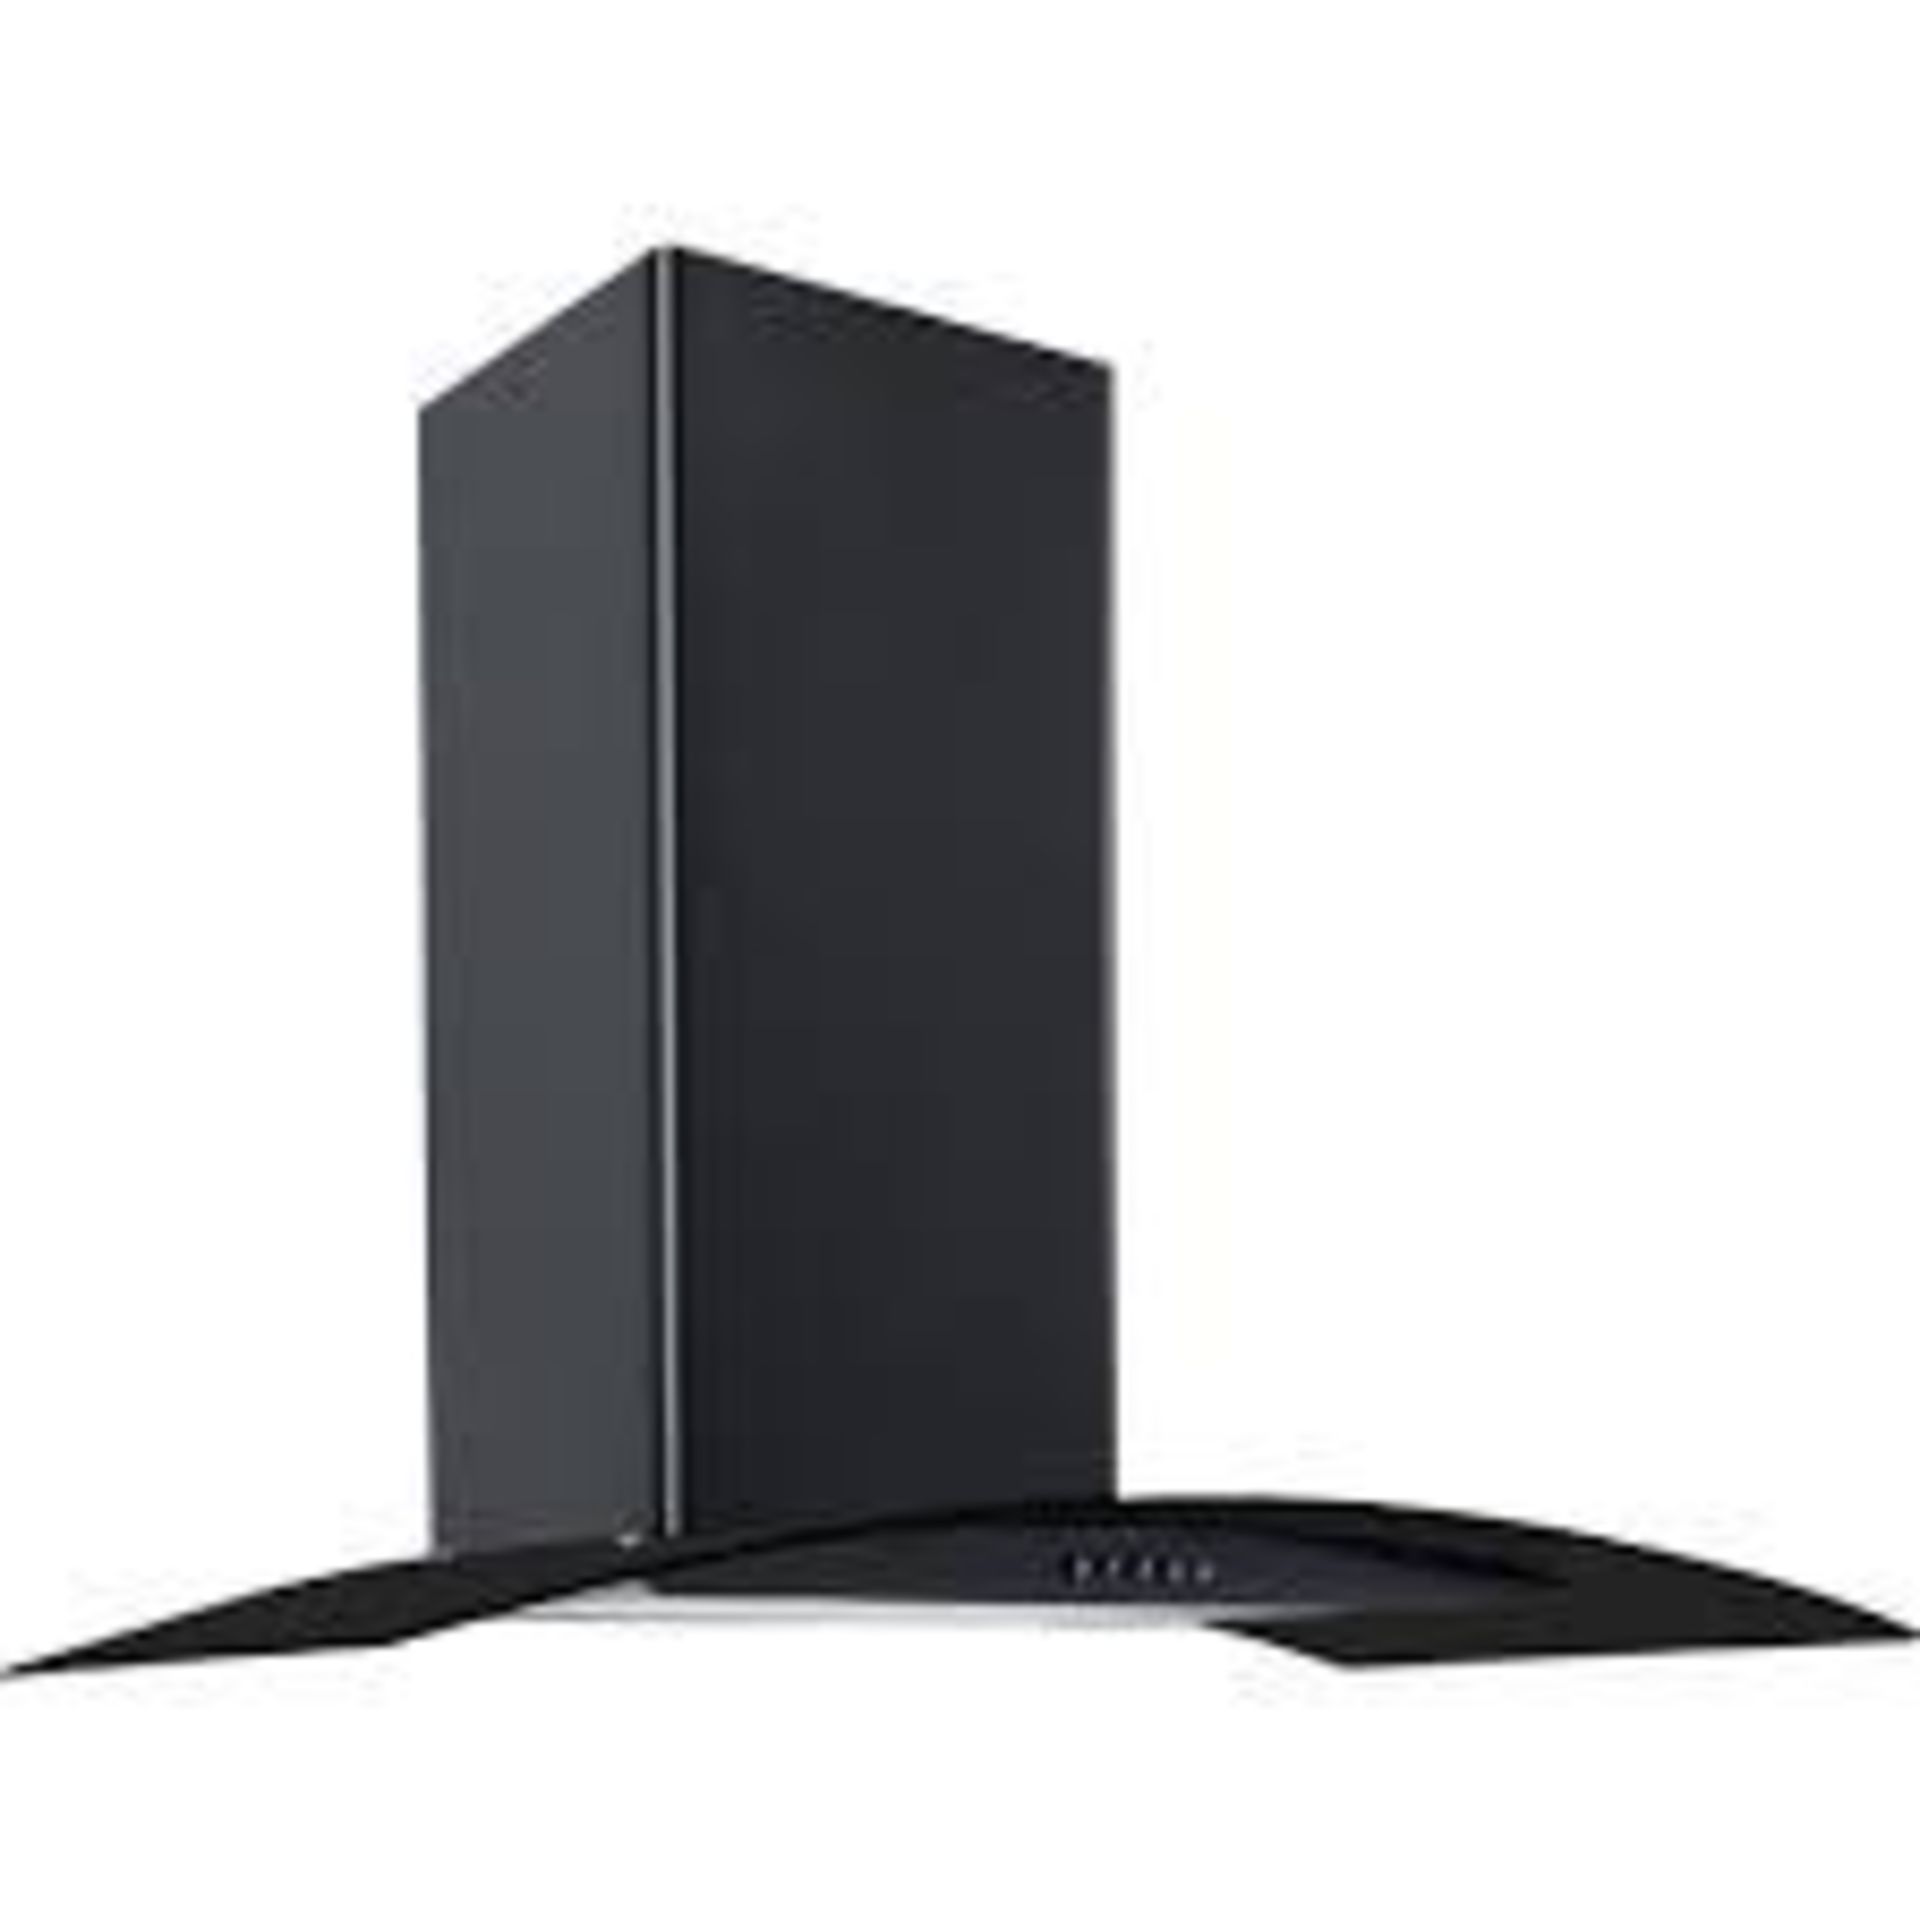 Boxed UBHHH90BK Angled Glass Black Cooker Hood RRP £150 (Pictures Are For Illustration Purposes